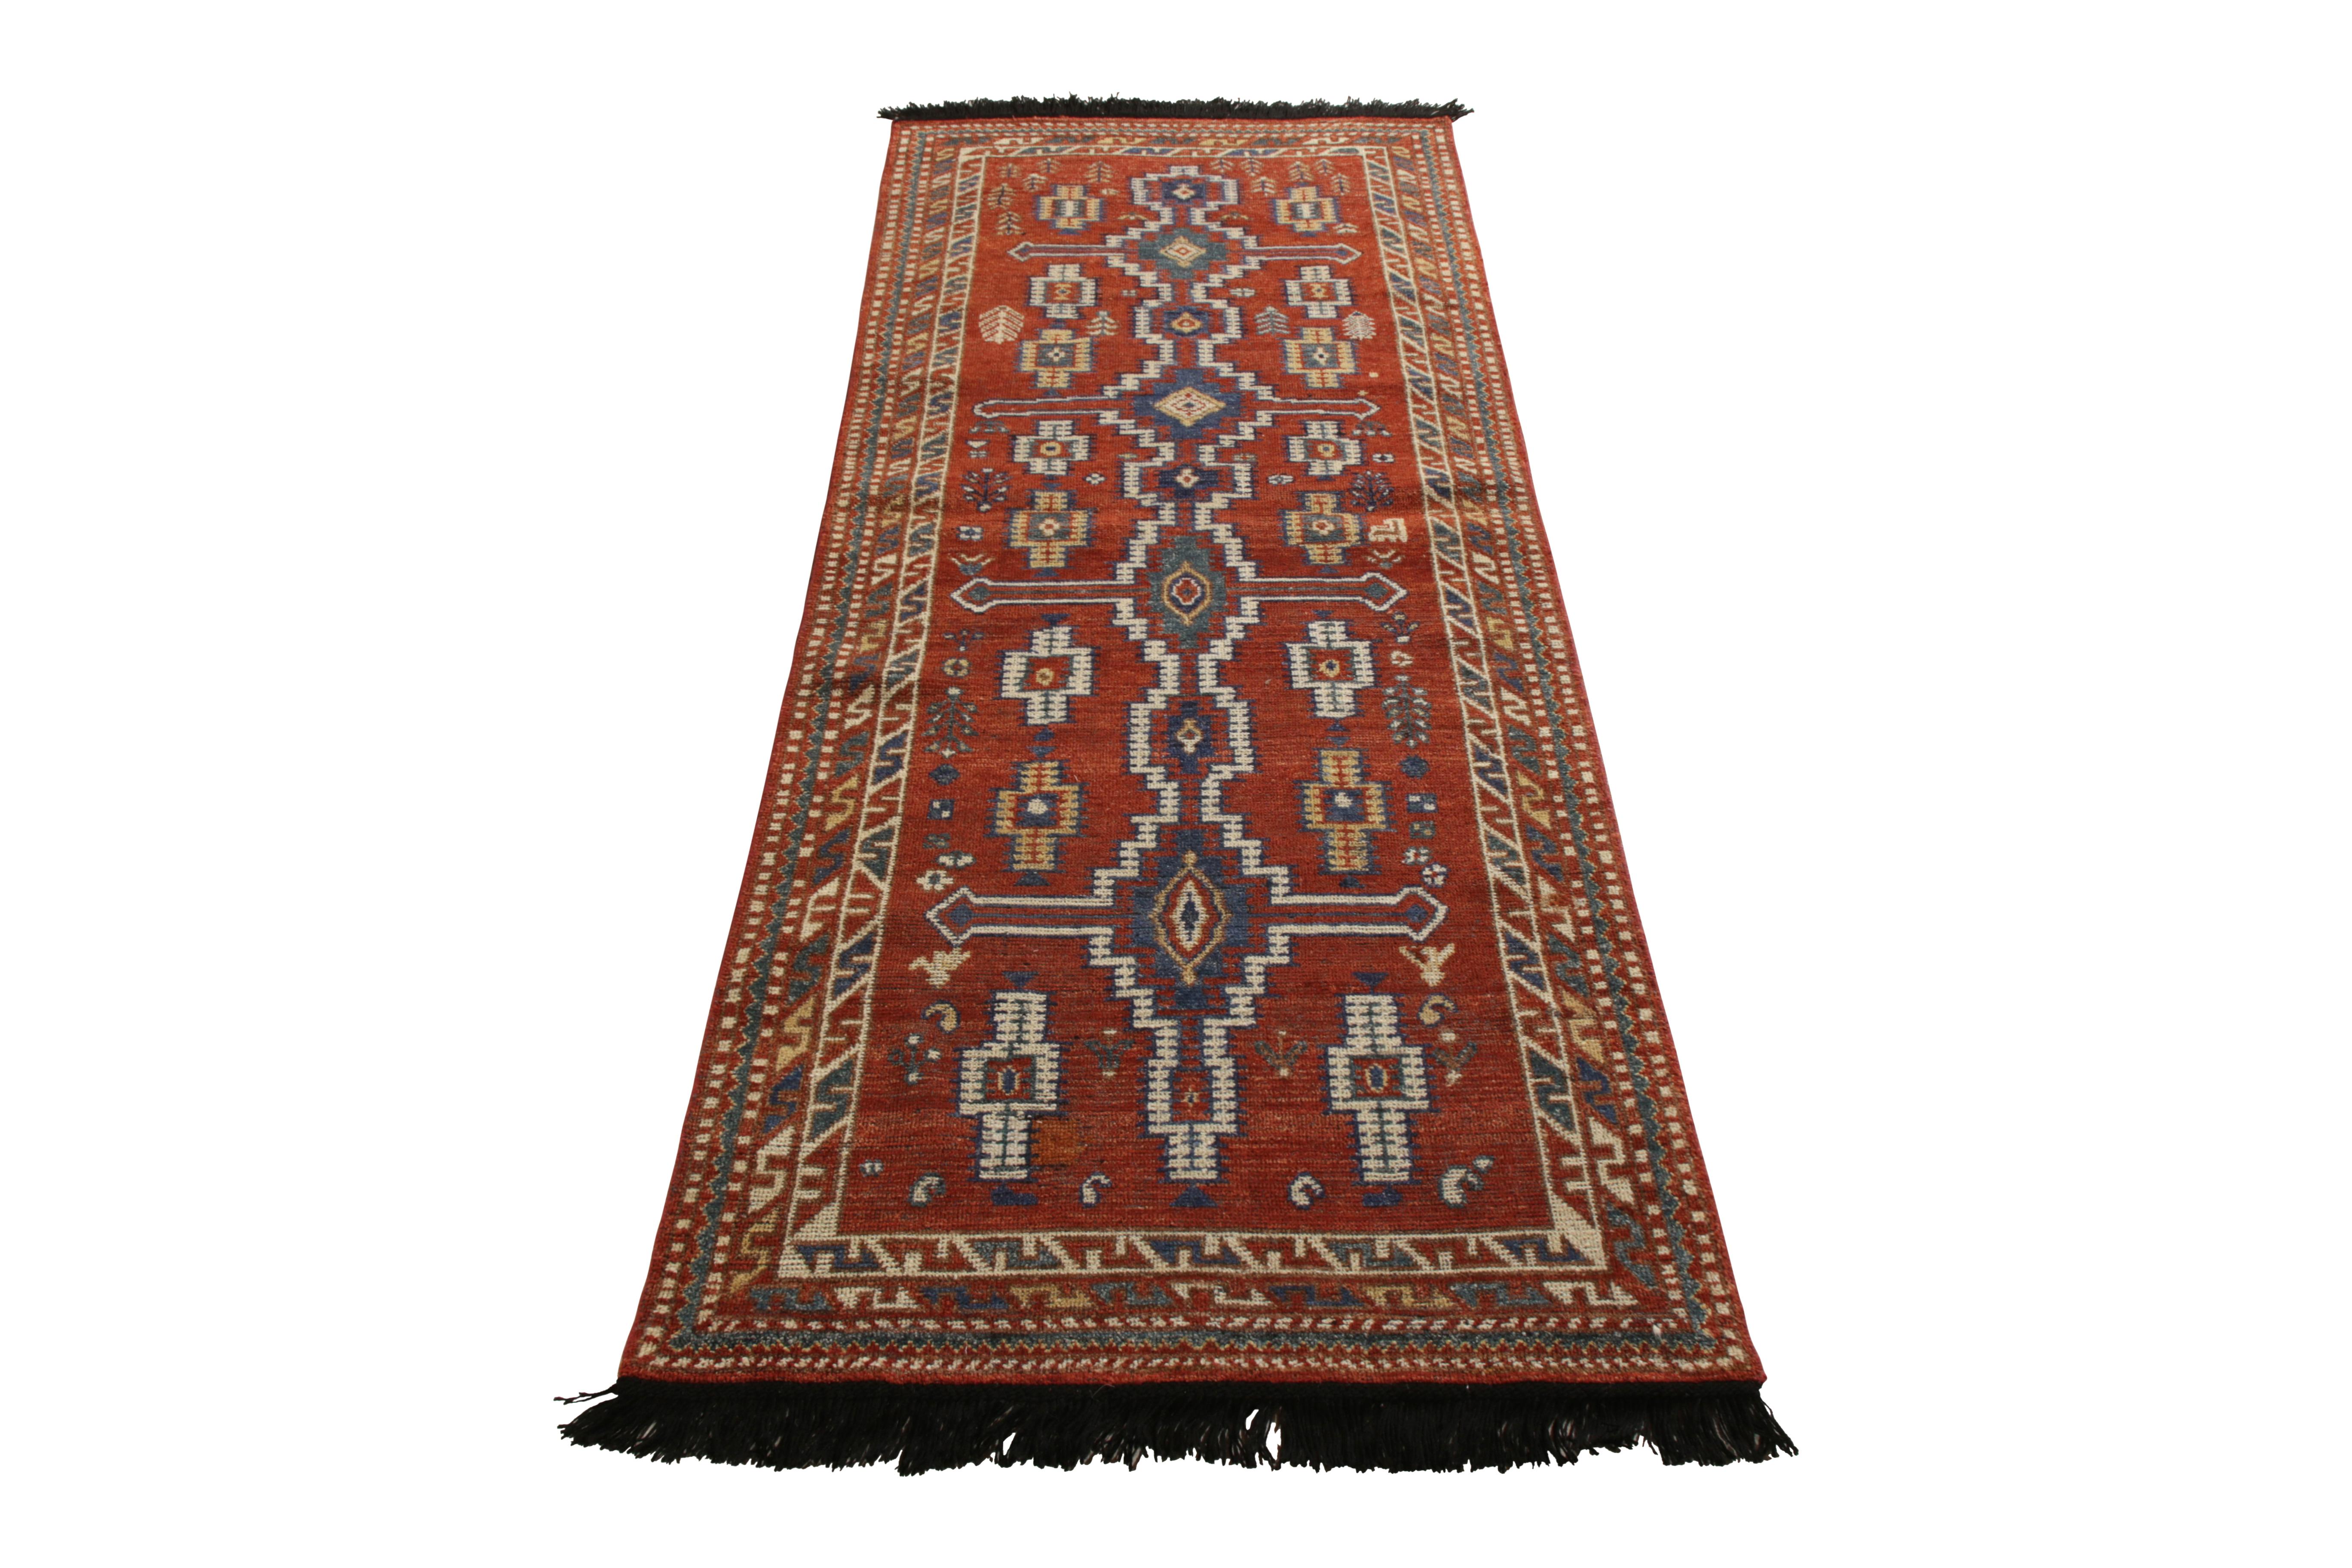 A 3 x 8 runner nodding to celebrated tribal rug styles, from Rug & Kilim’s Burano Collection. Hand knotted in notably soft Ghazni wool, enjoying rich burn red and blue hues with intricate all over geometric patterns. A rich play of warm-and-cool